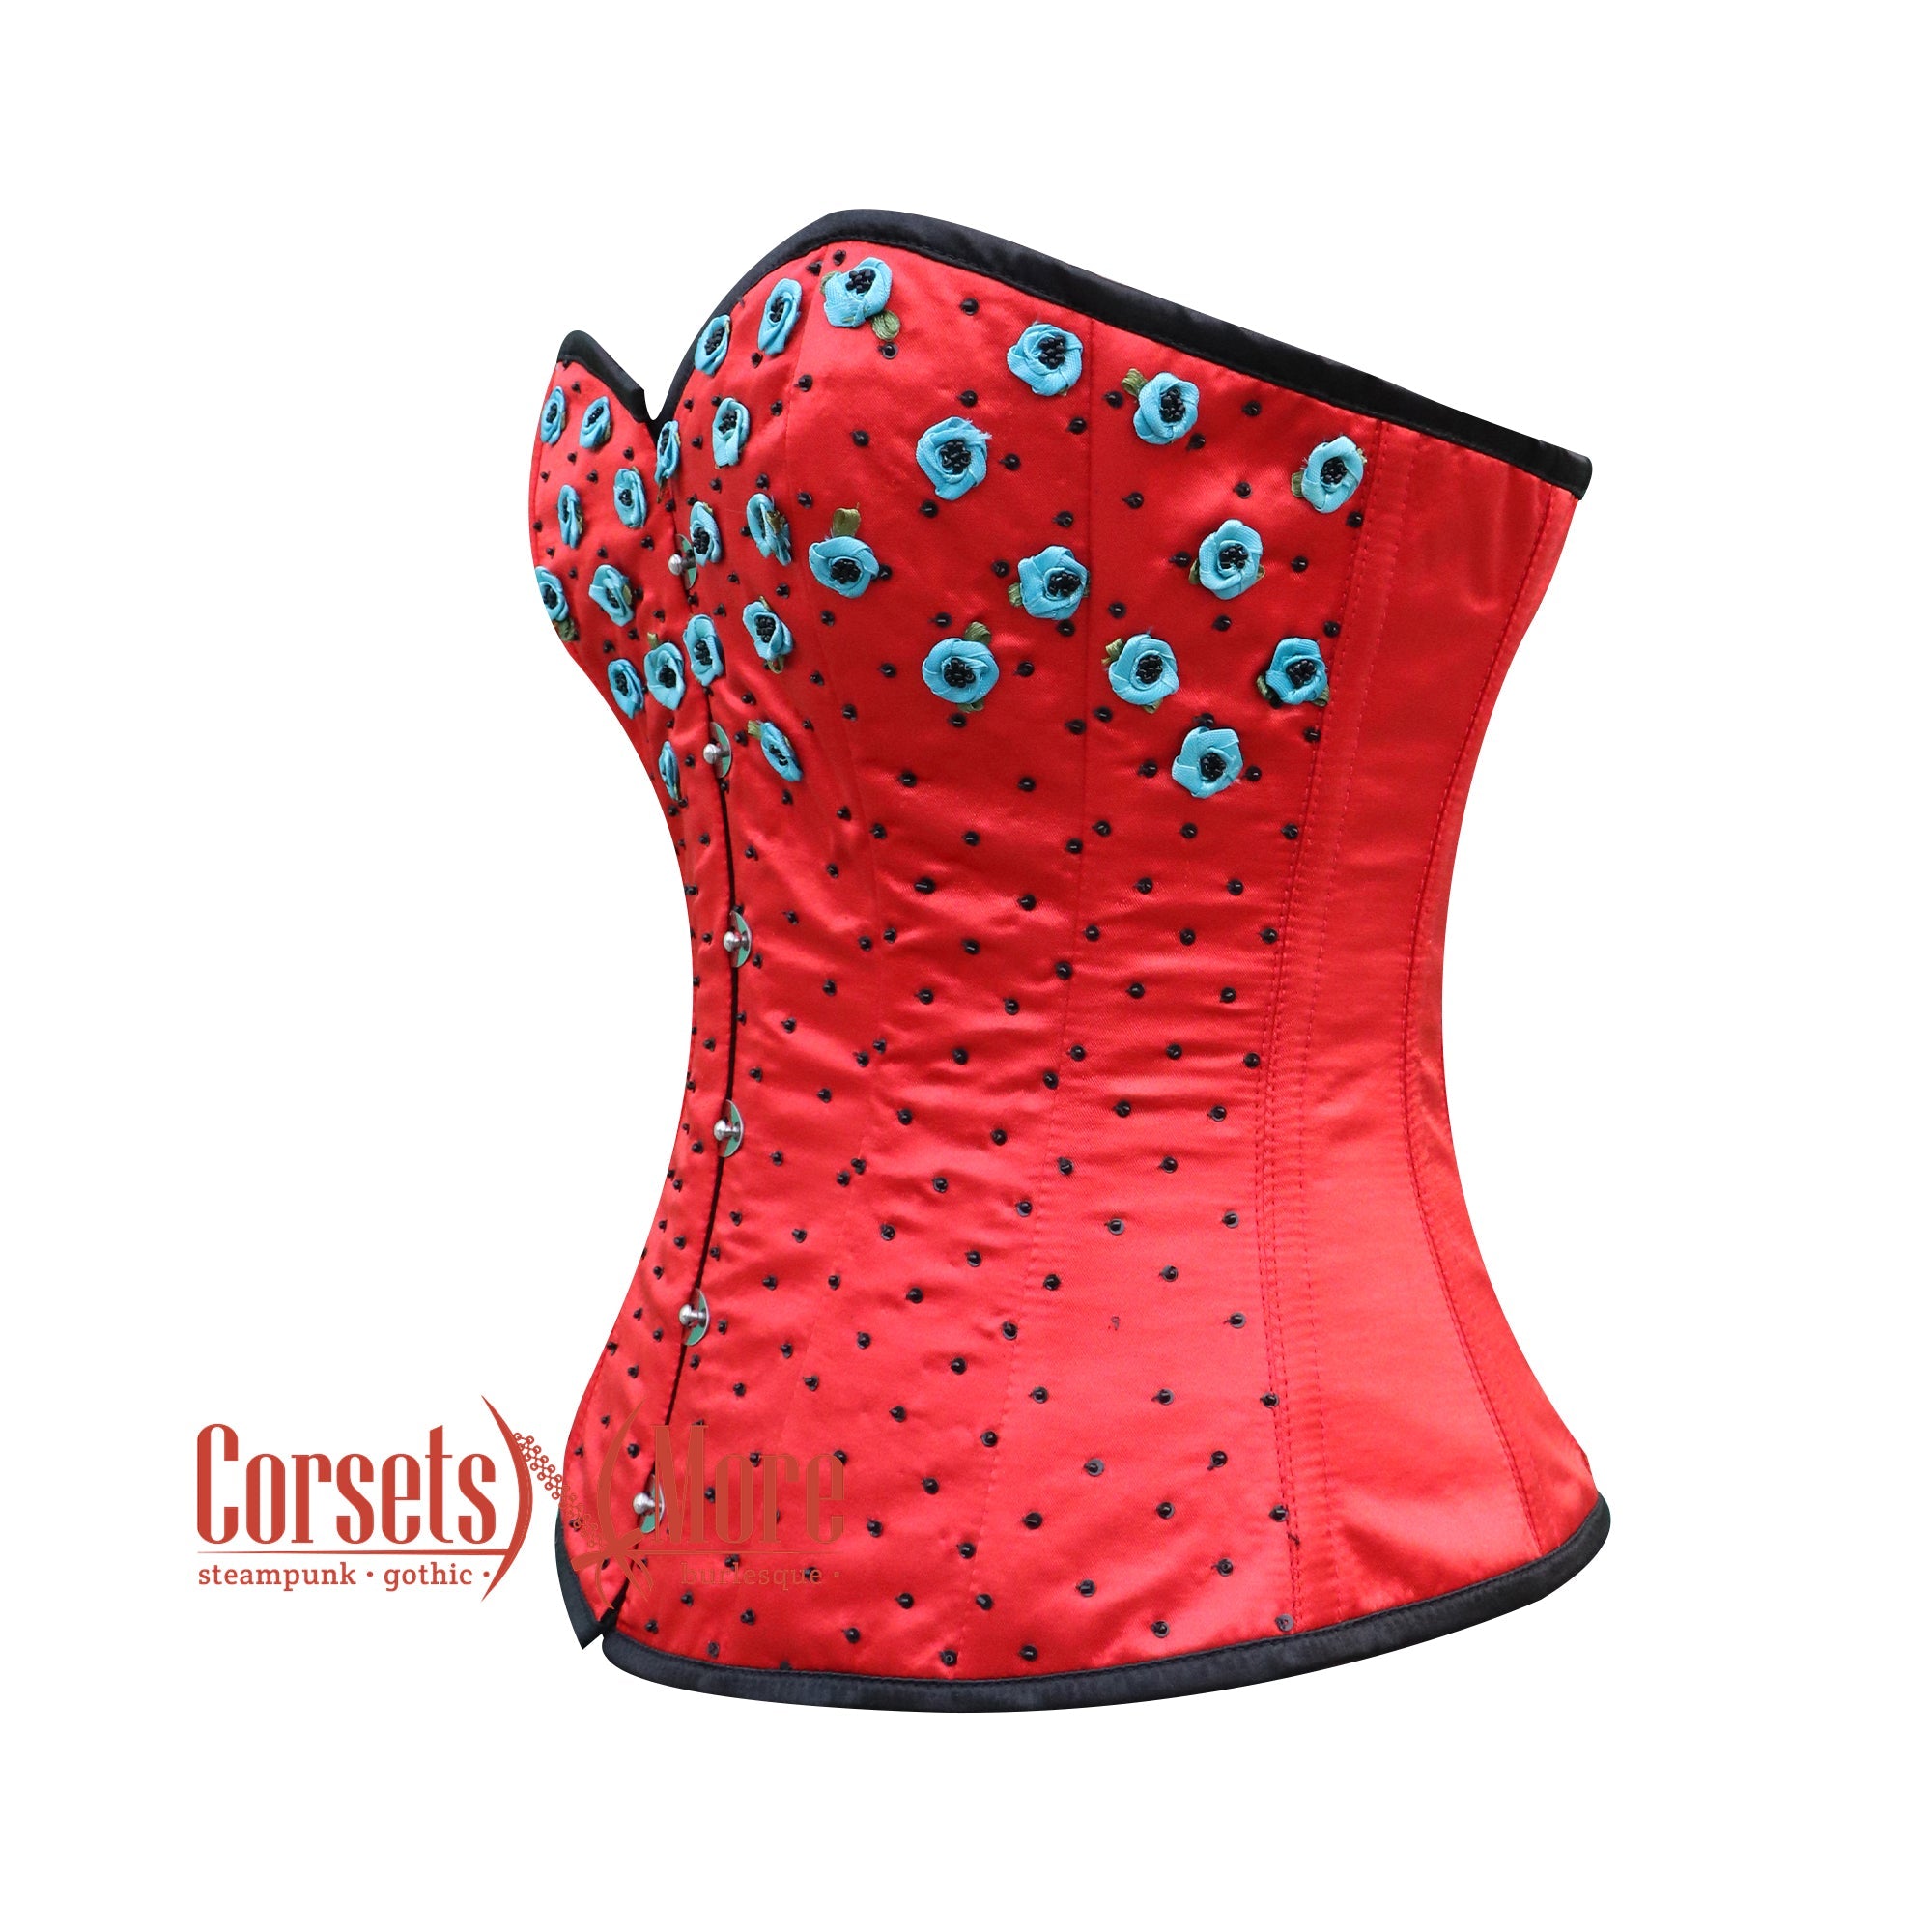 Burlesque Corset In Black and Red Floral Print (Boned Corsets)